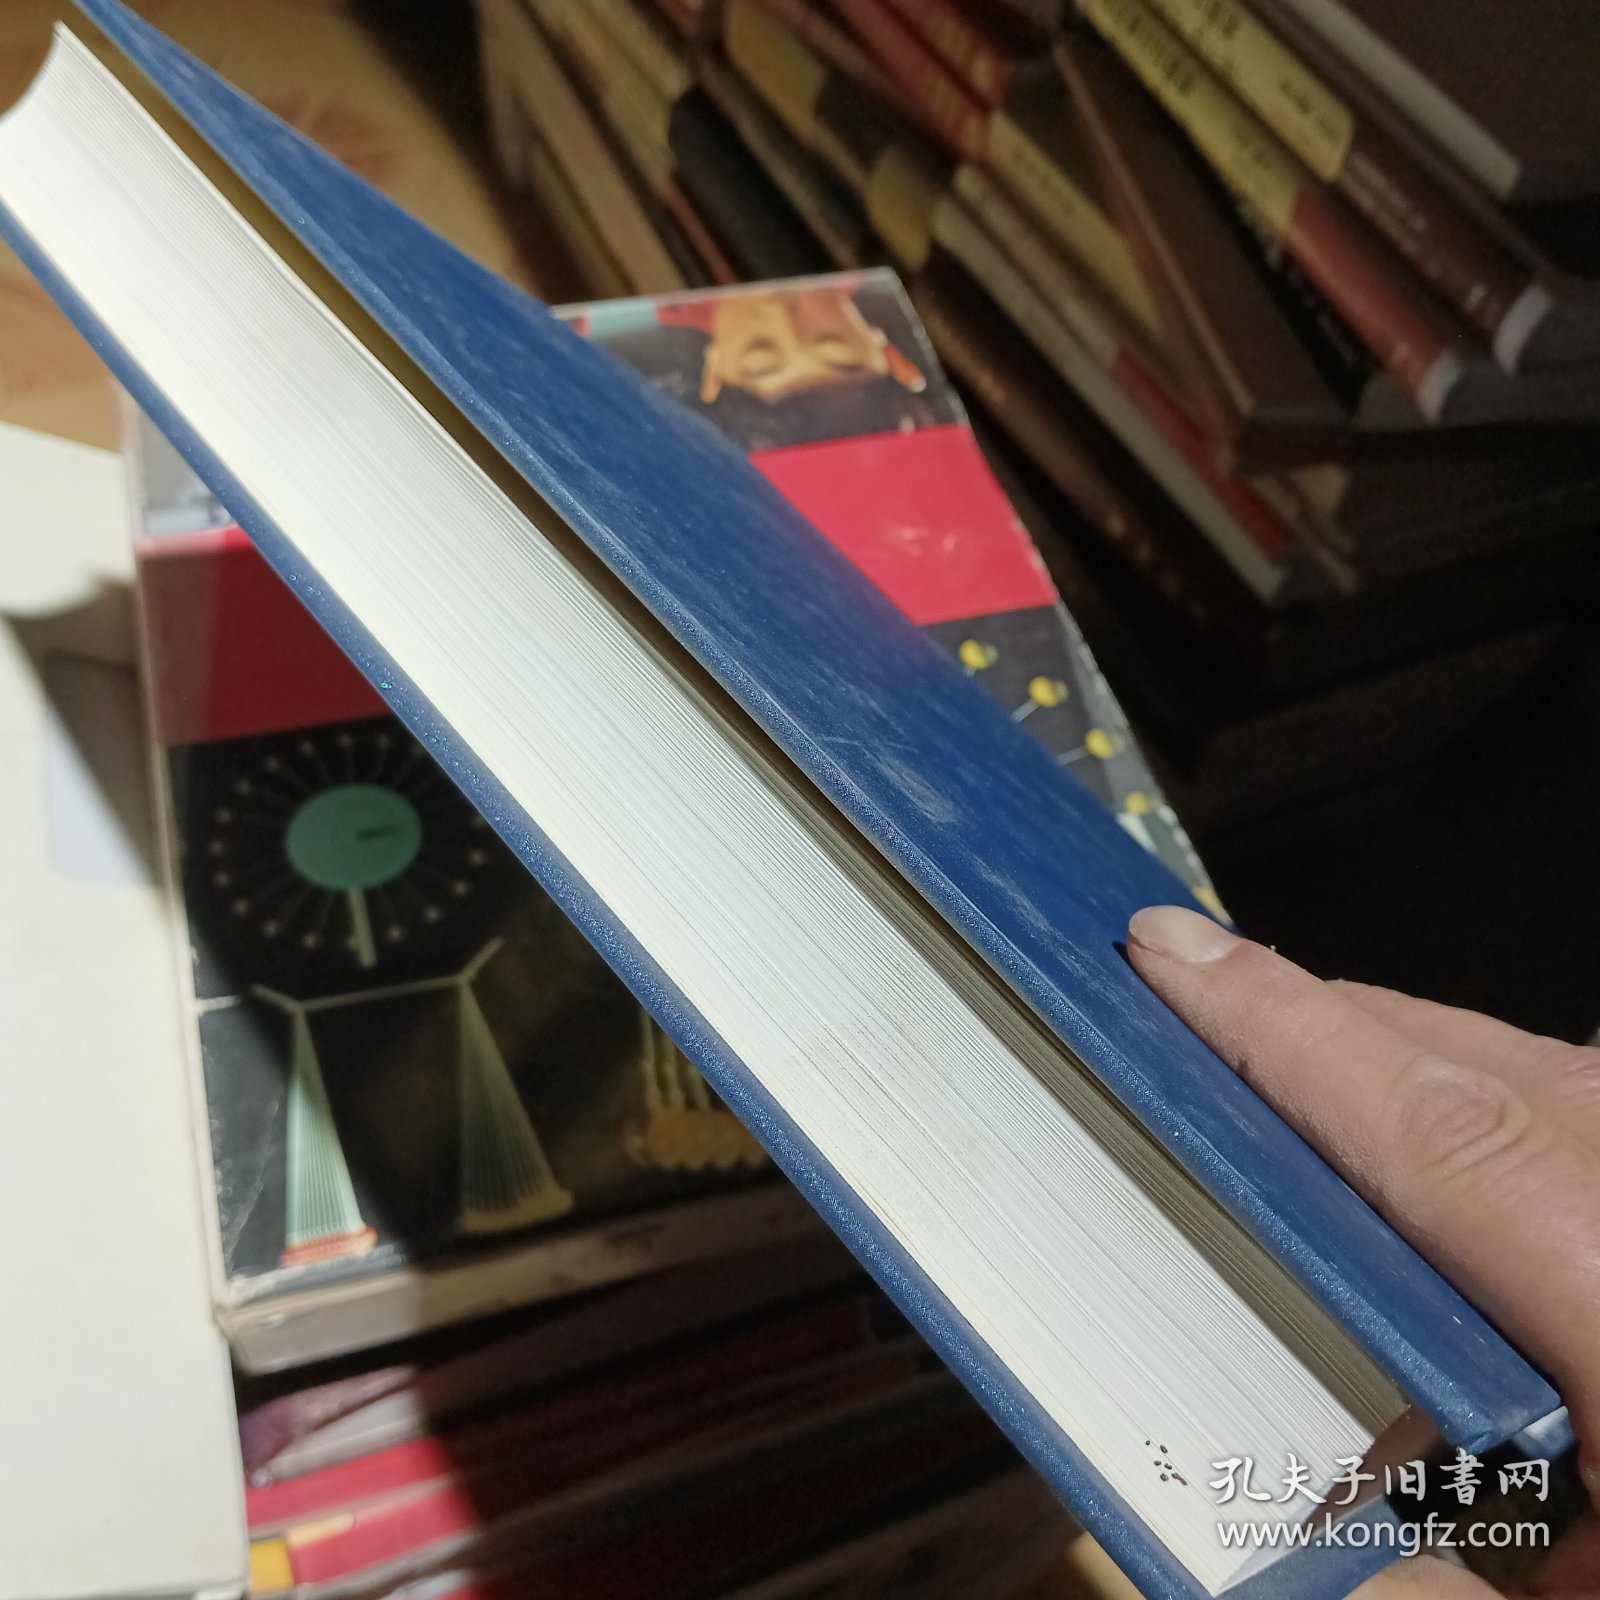 LAW YEARBOOK OF CHINA 20152015中国法律年鉴